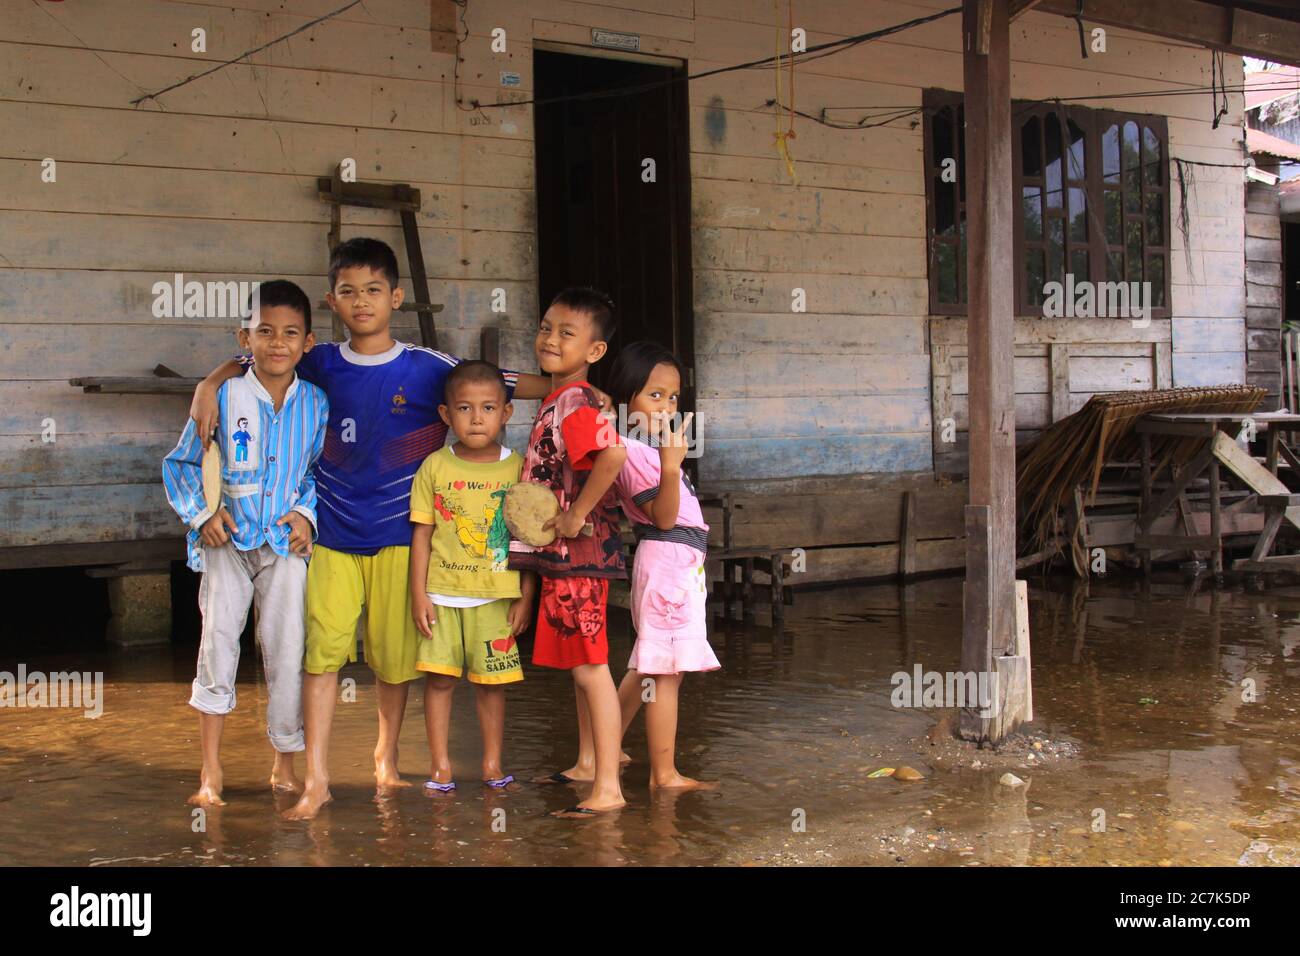 Playful children in colorful clothes, posing in front of wooden house flooded by Alas river waters, in Singkil, Aceh, Indonesia. Stock Photo